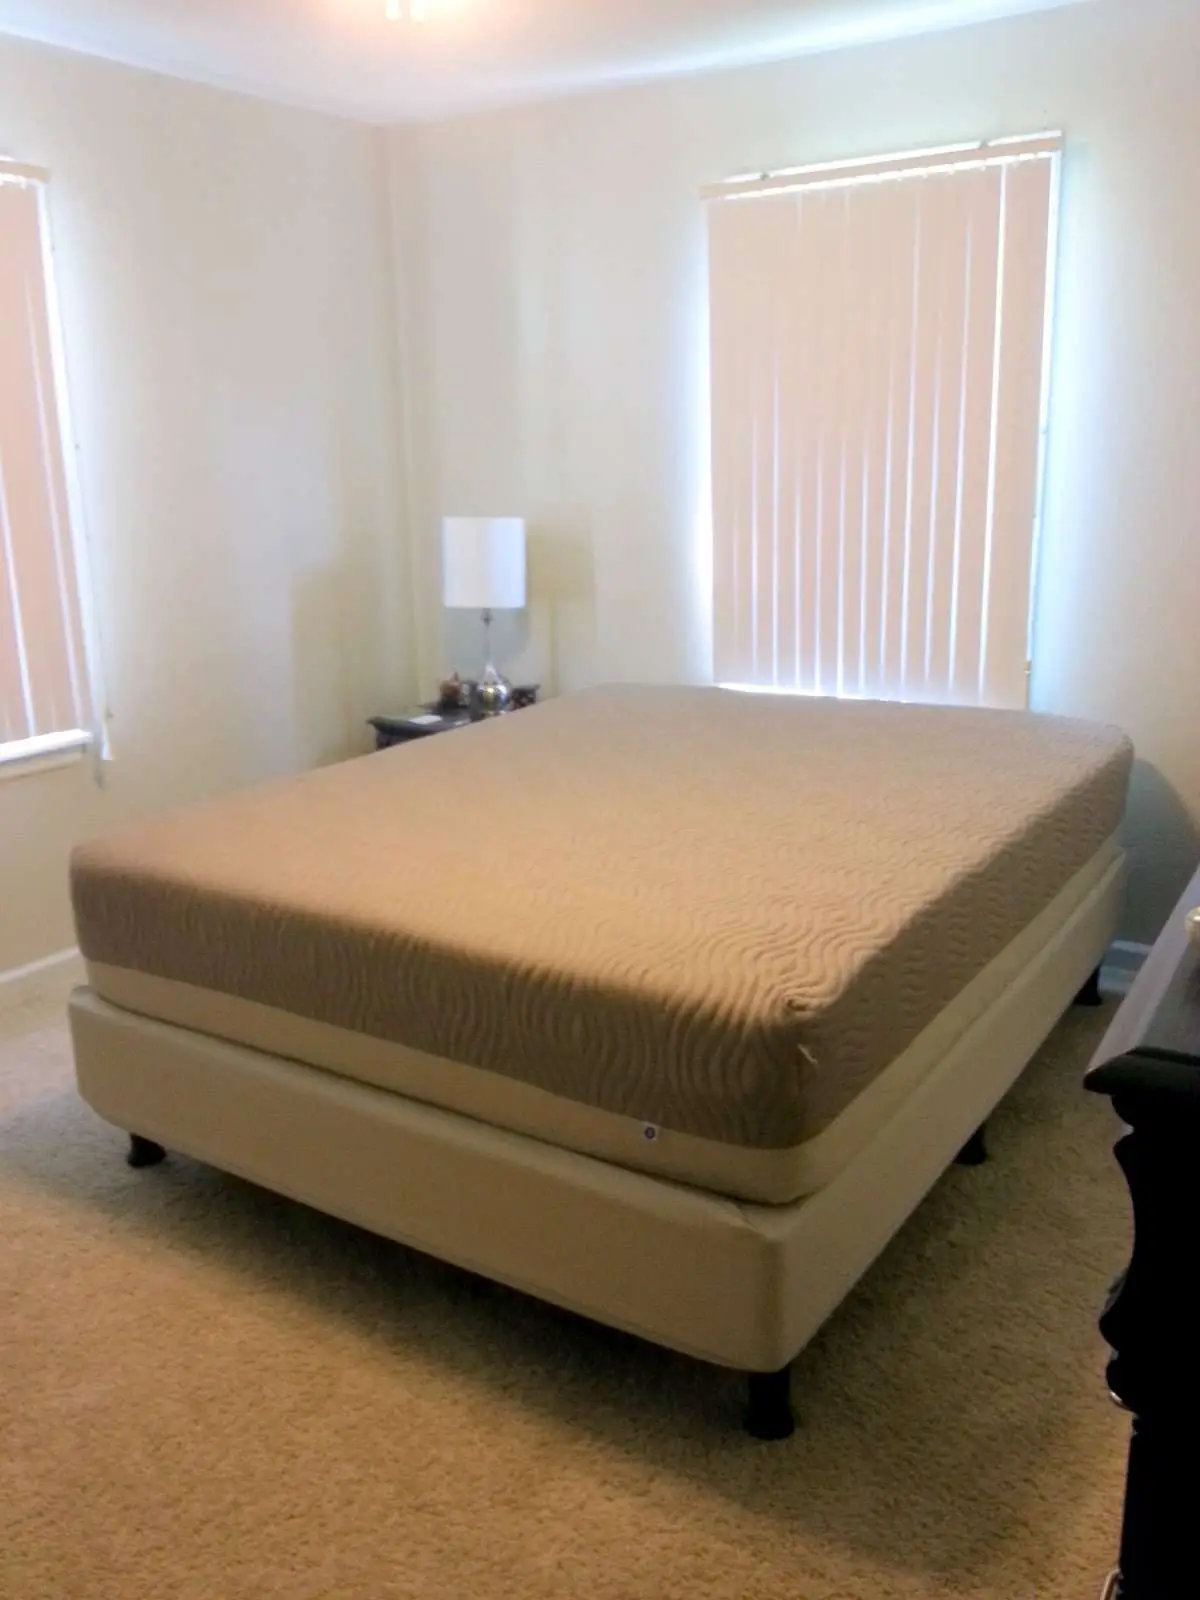 Home Life: Sleep Number m7 Memory Foam Bed Review